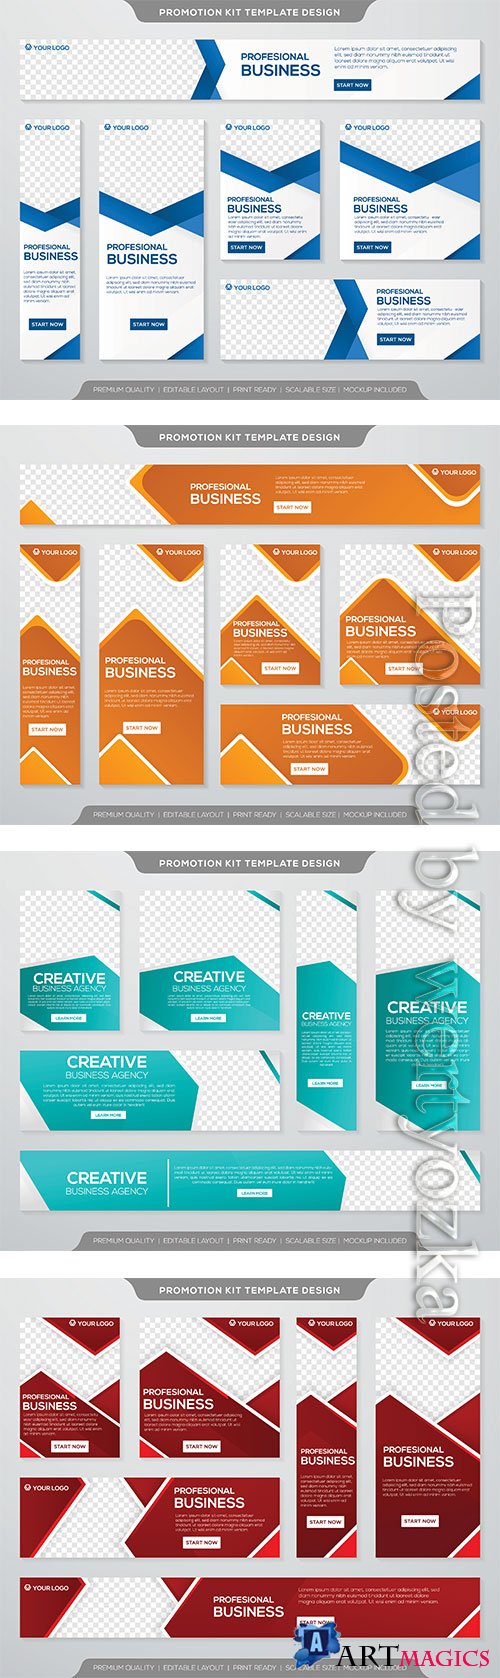 Business promotion kit template with simple layout